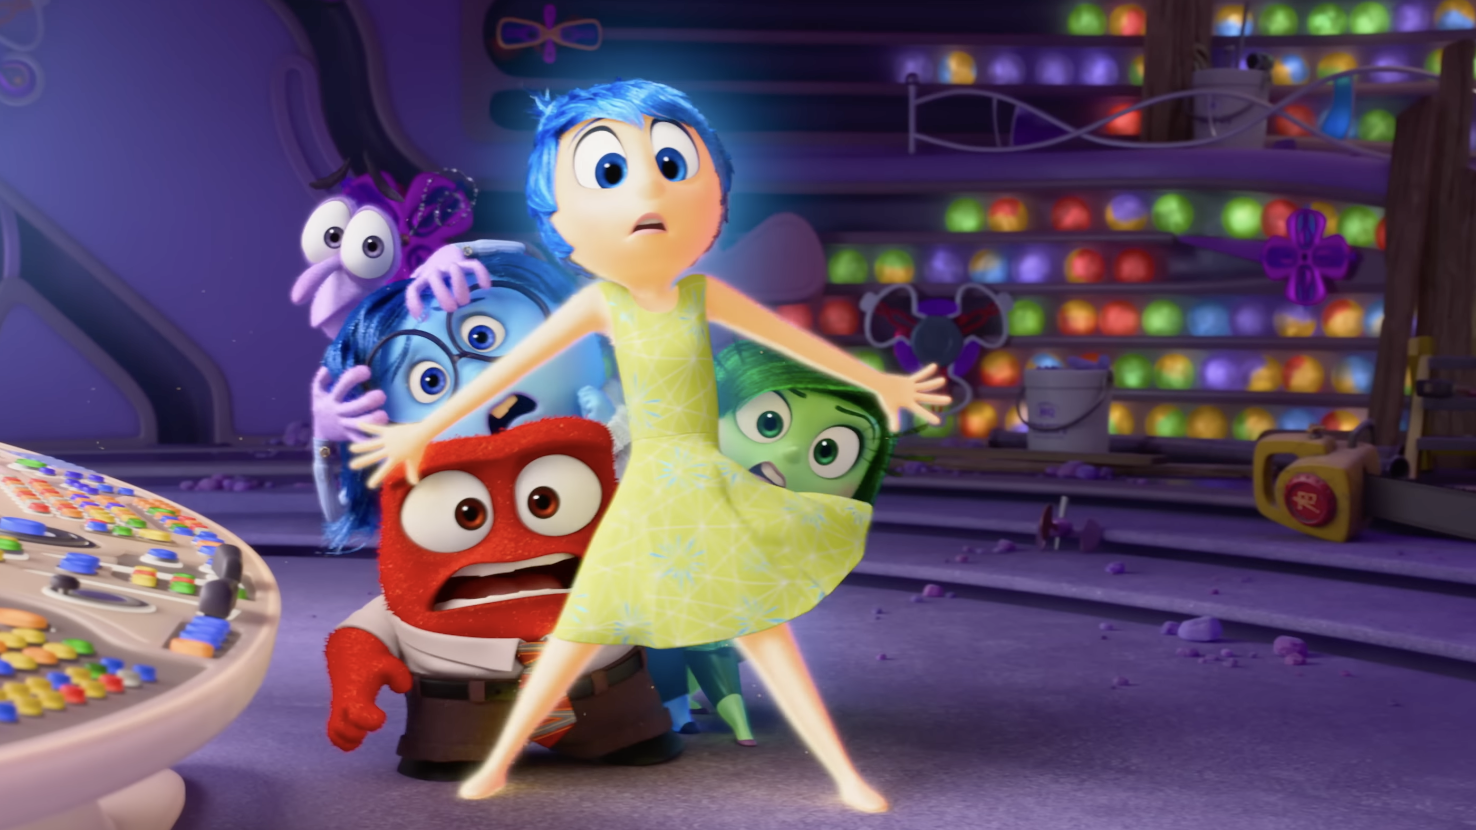 Pixar's 'Inside Out 2' Smashes Animated Movie Records With $100 Million Second Weekend in US